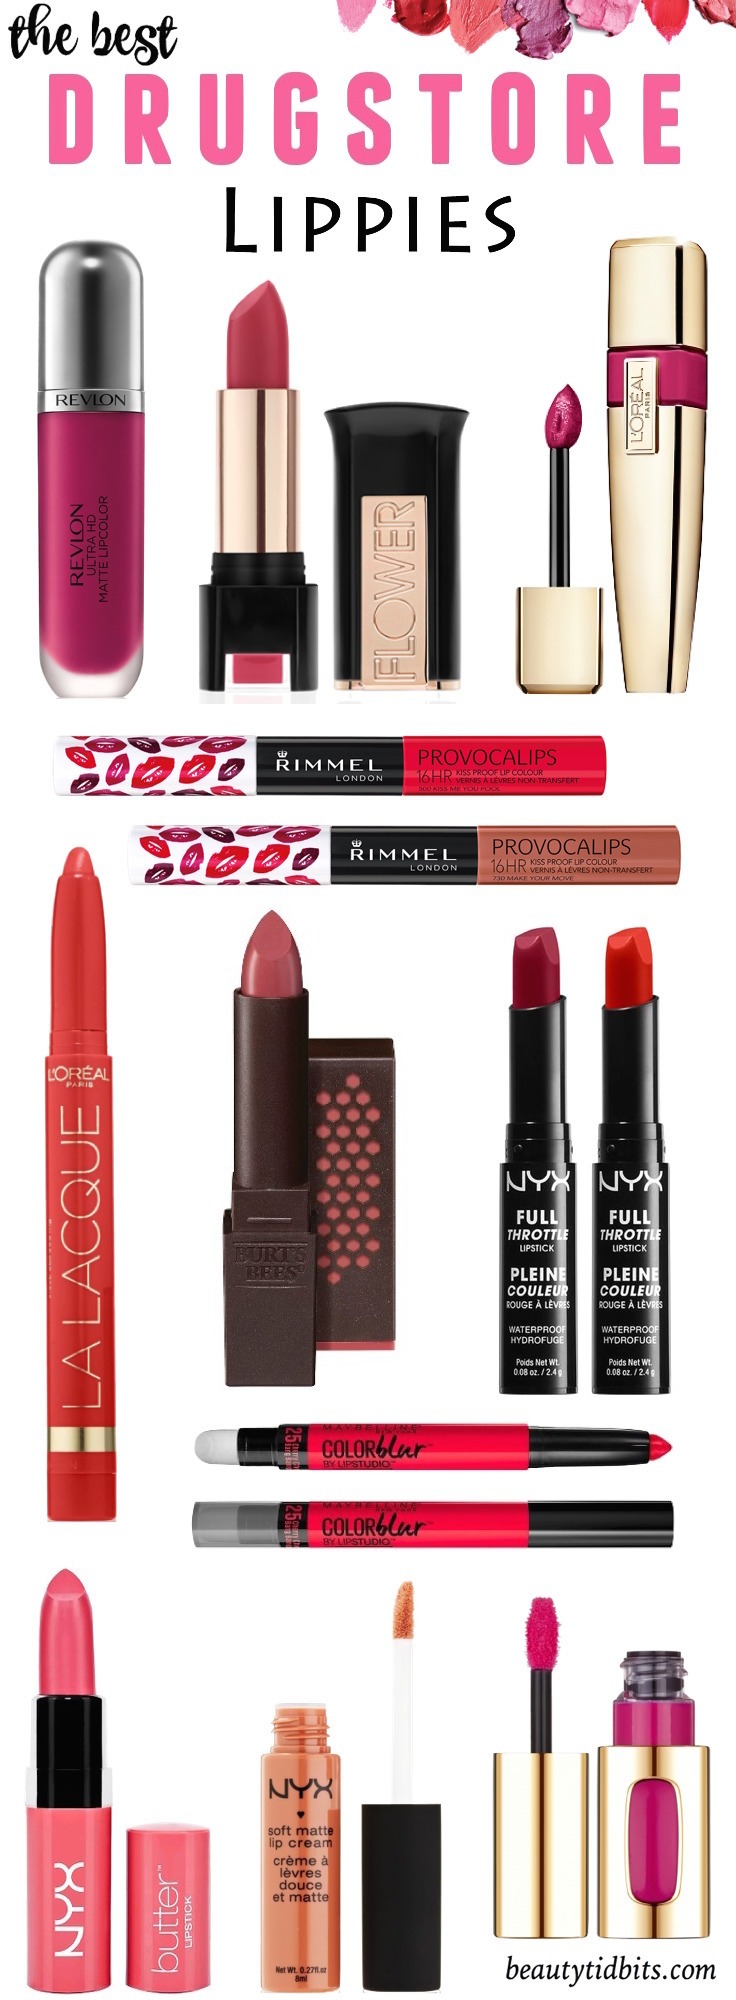 L'Oréal, Revlon, Maybelline, Rimmel, oh my! These are the best drugstore lipsticks that not only feel comfortable, but seriously deliver in the pigment and texture departments! 